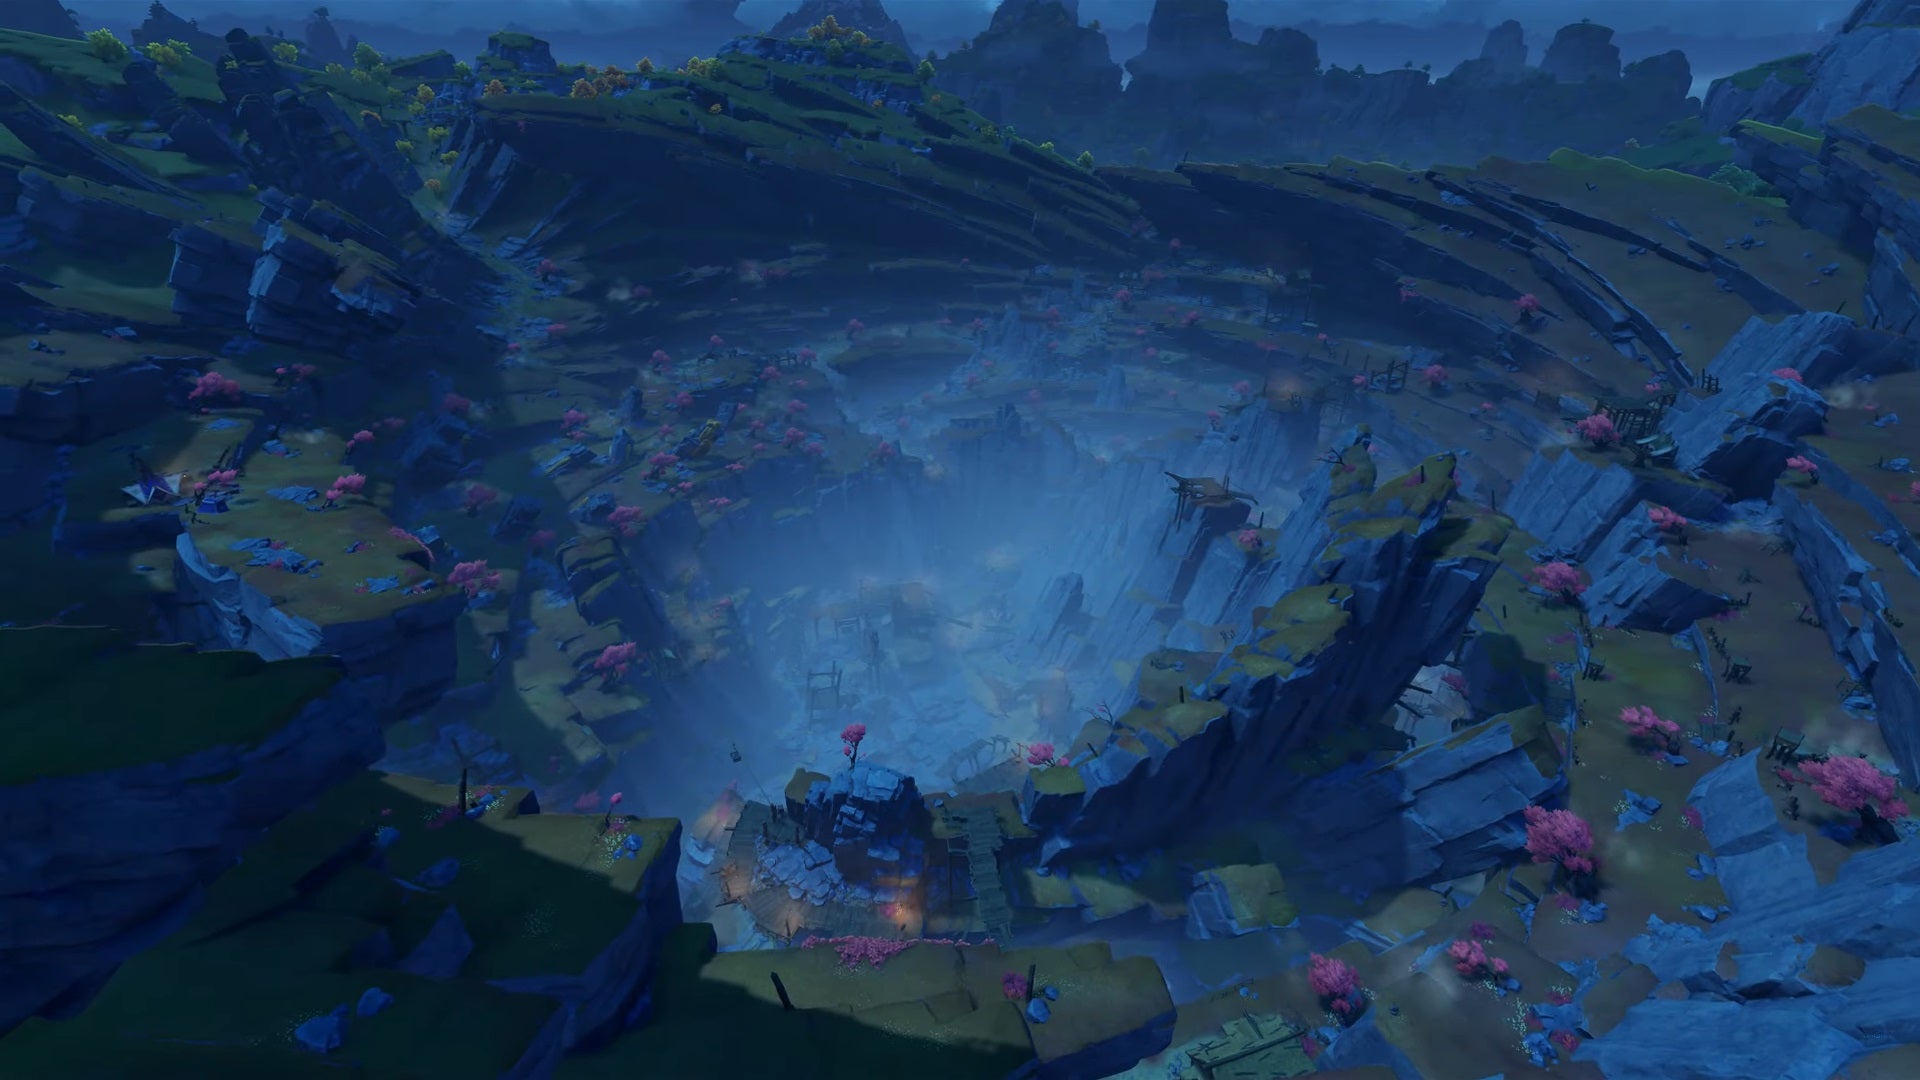 The Chasm at night, where version 2.7 of Genshin Impact will take place.